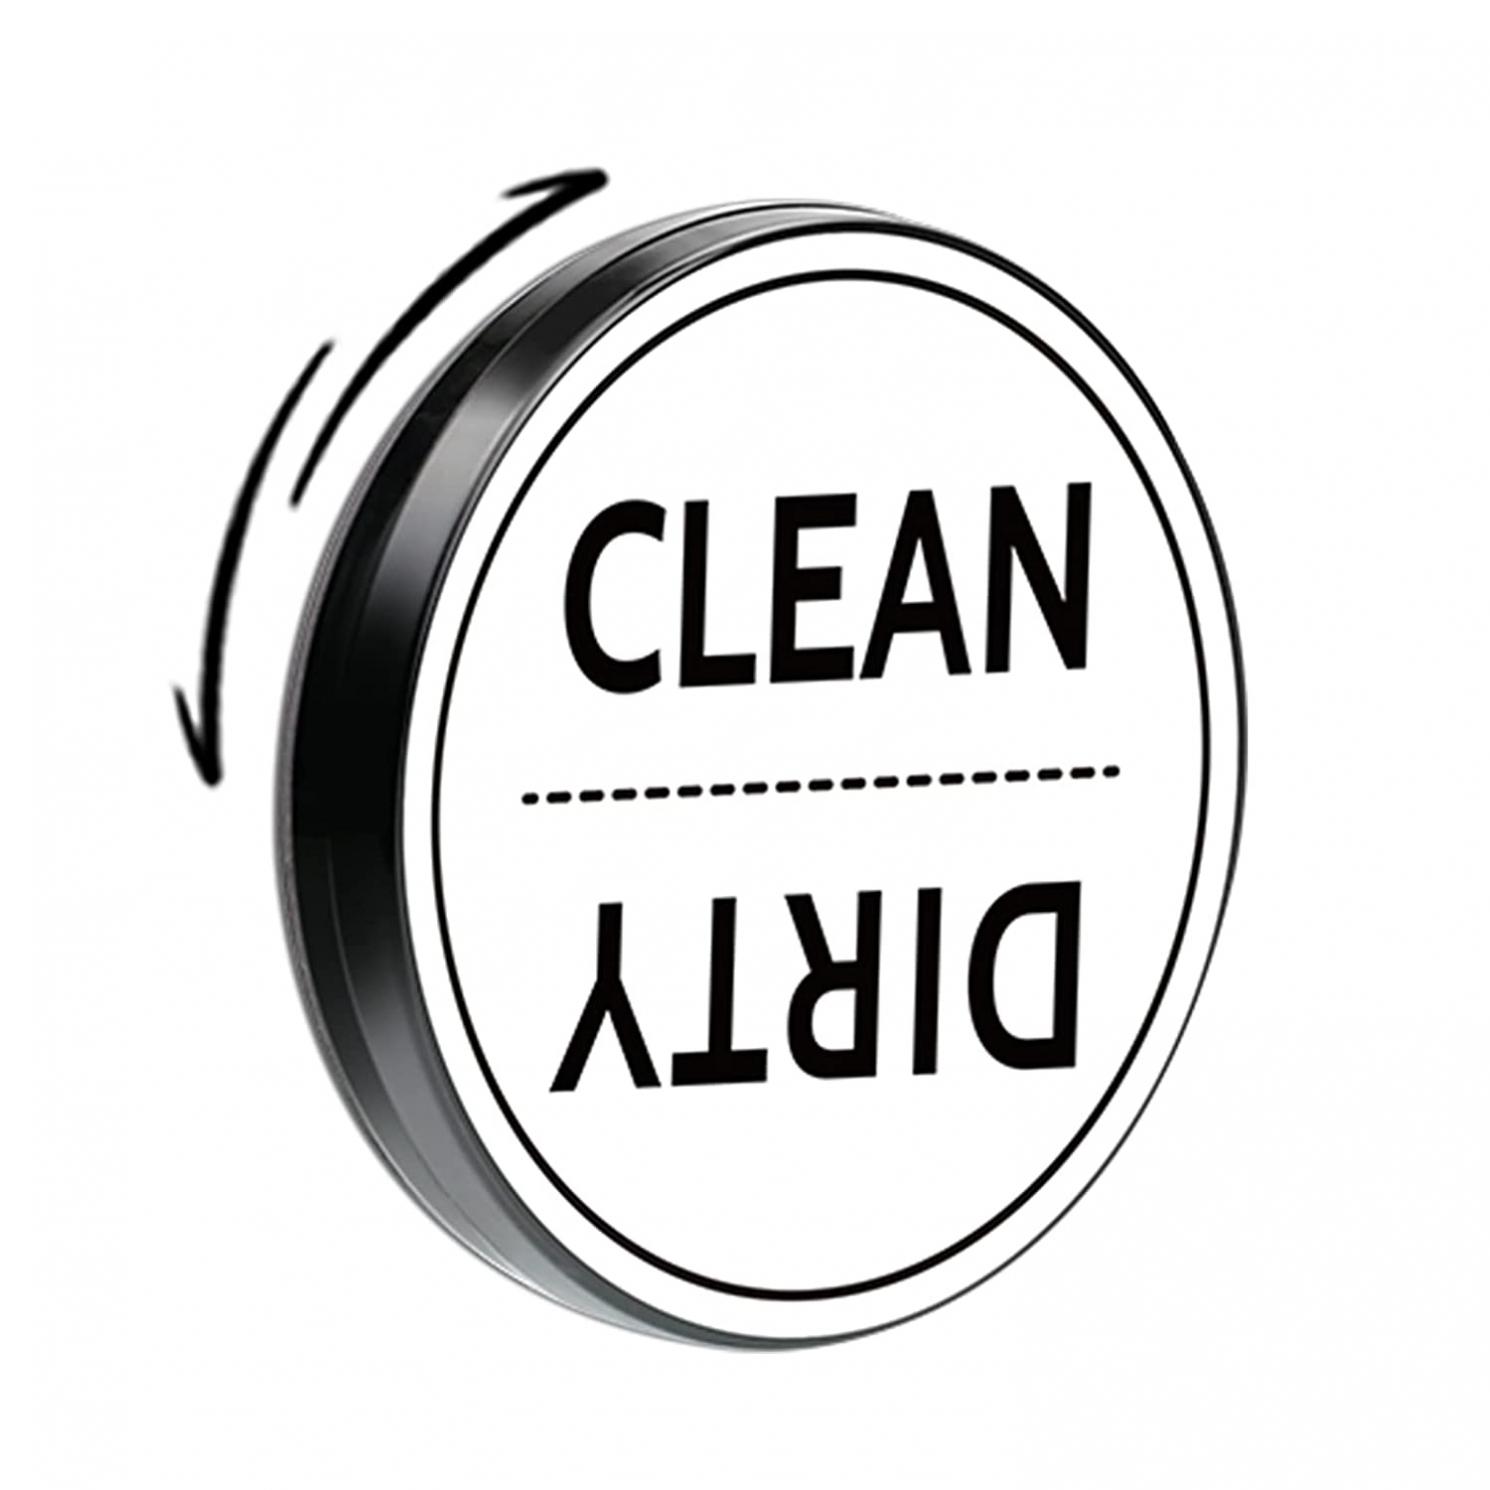 Dishwasher Magnet Clean Dirty Sign, The Latest Double-Layer Rotatable Design, Clean Dirty Magnet for Dishwasher- Two States Indicate Clean and Dirty, Minimalist Style Dishwasher Magnet